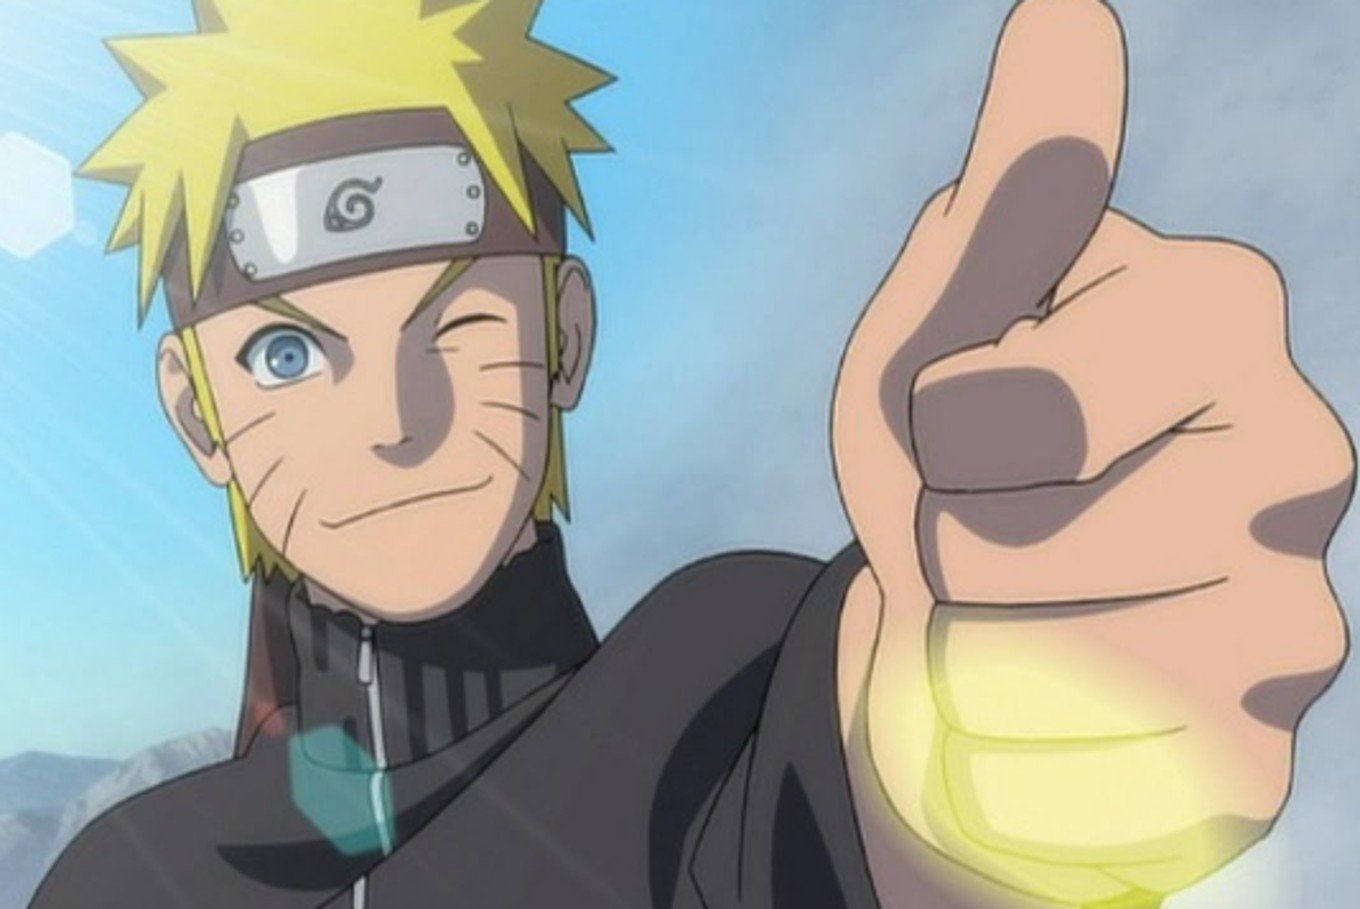 20 Facts About "Naruto" You Should Know